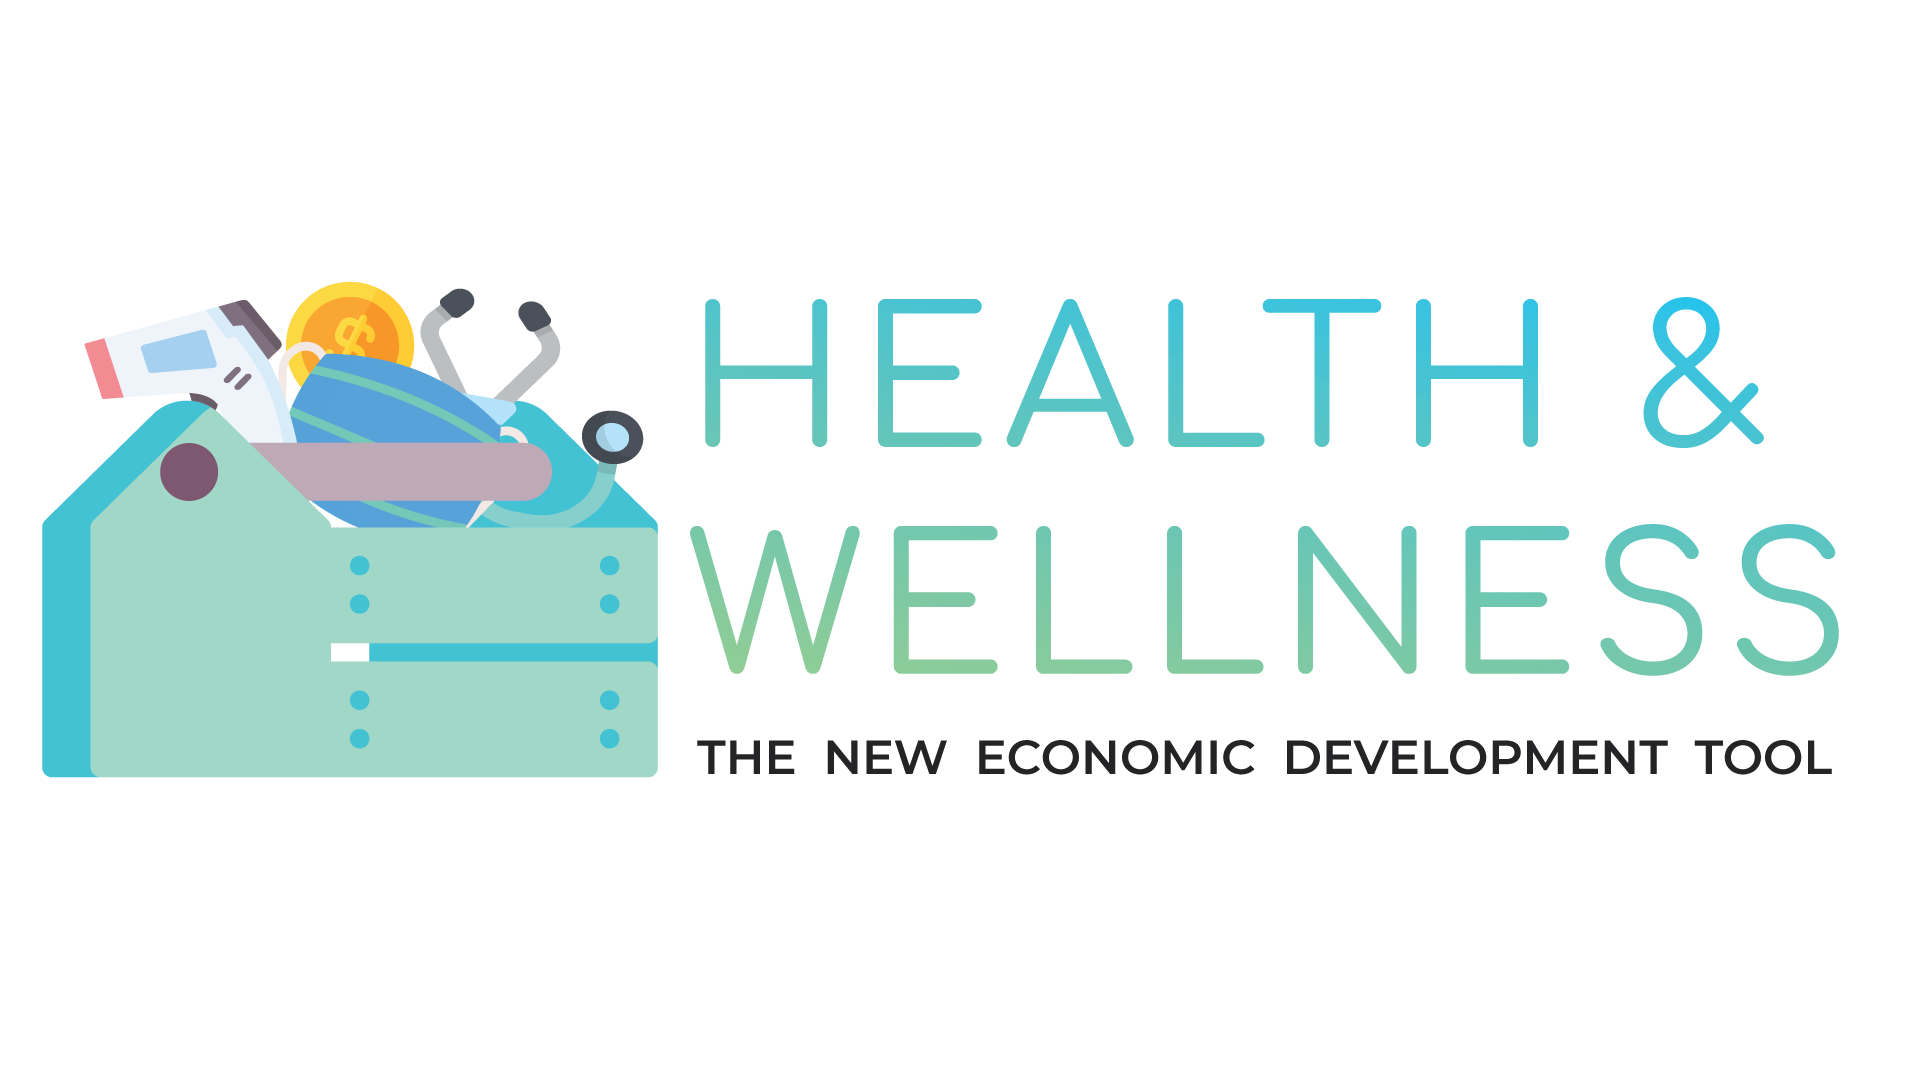 Health and wellness the new economic development tool graphic with toolbox